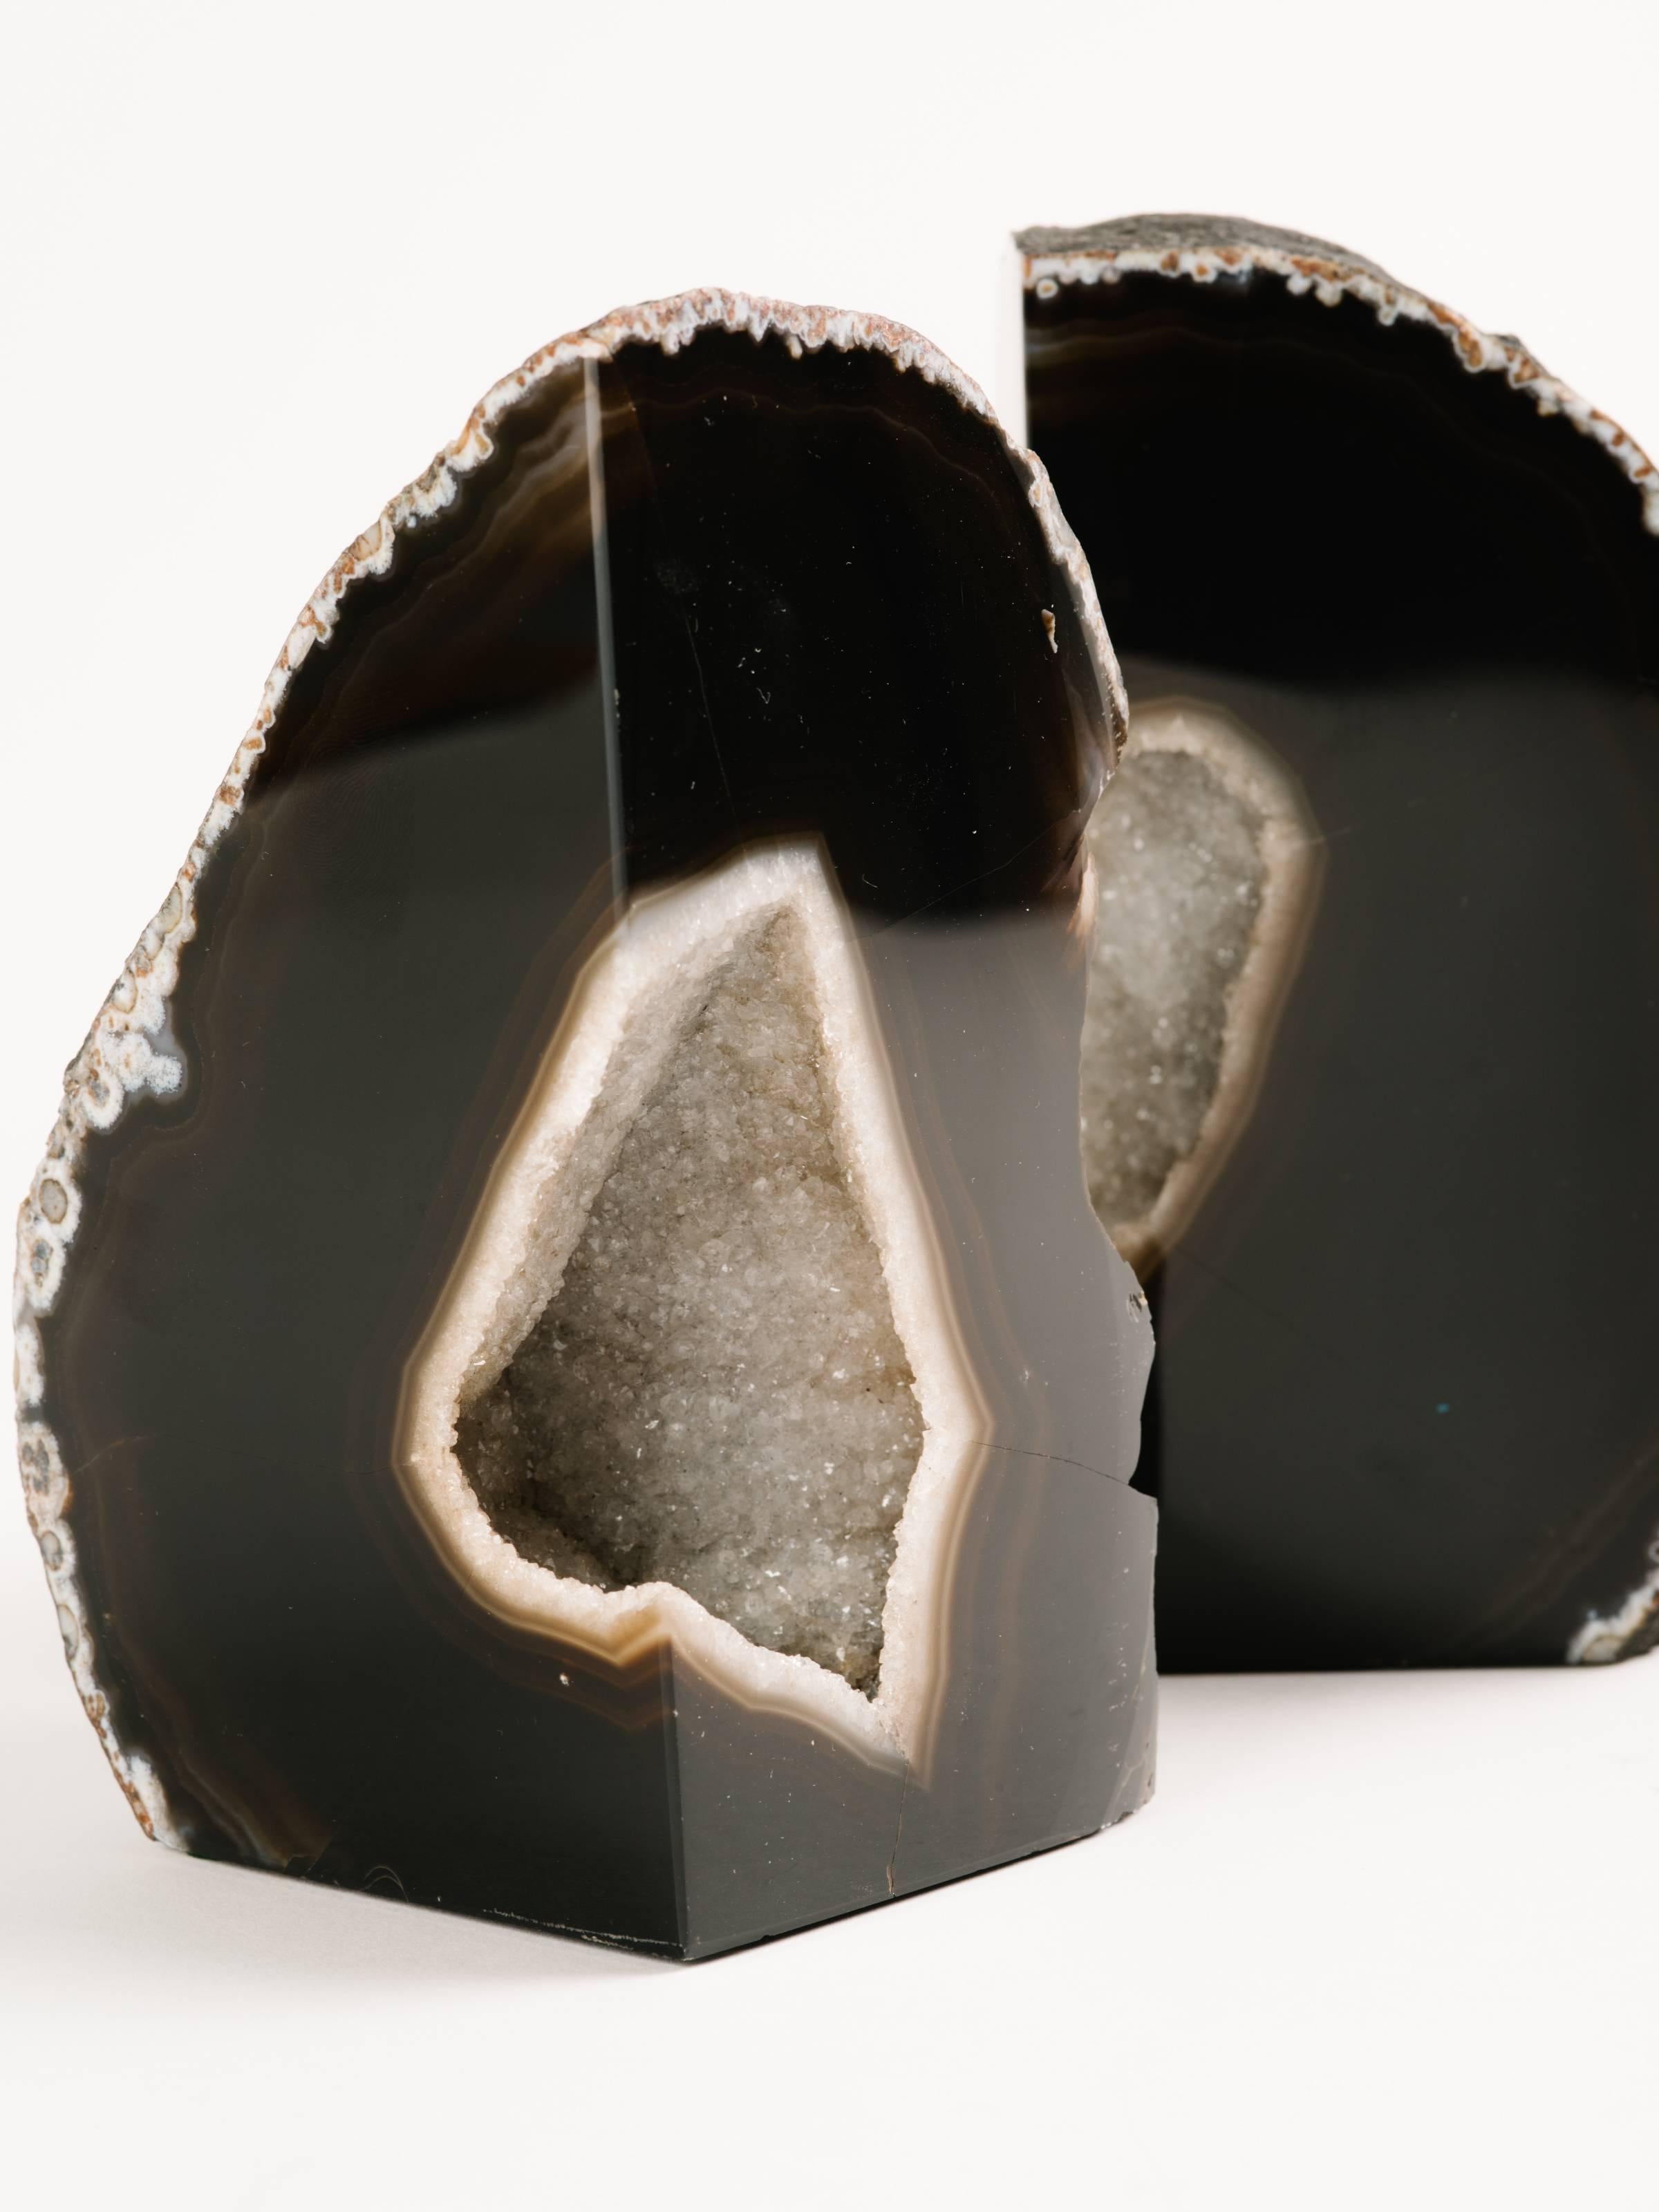 Organic Modern Pair of Organic Agate Stone and Rock Crystal Bookends